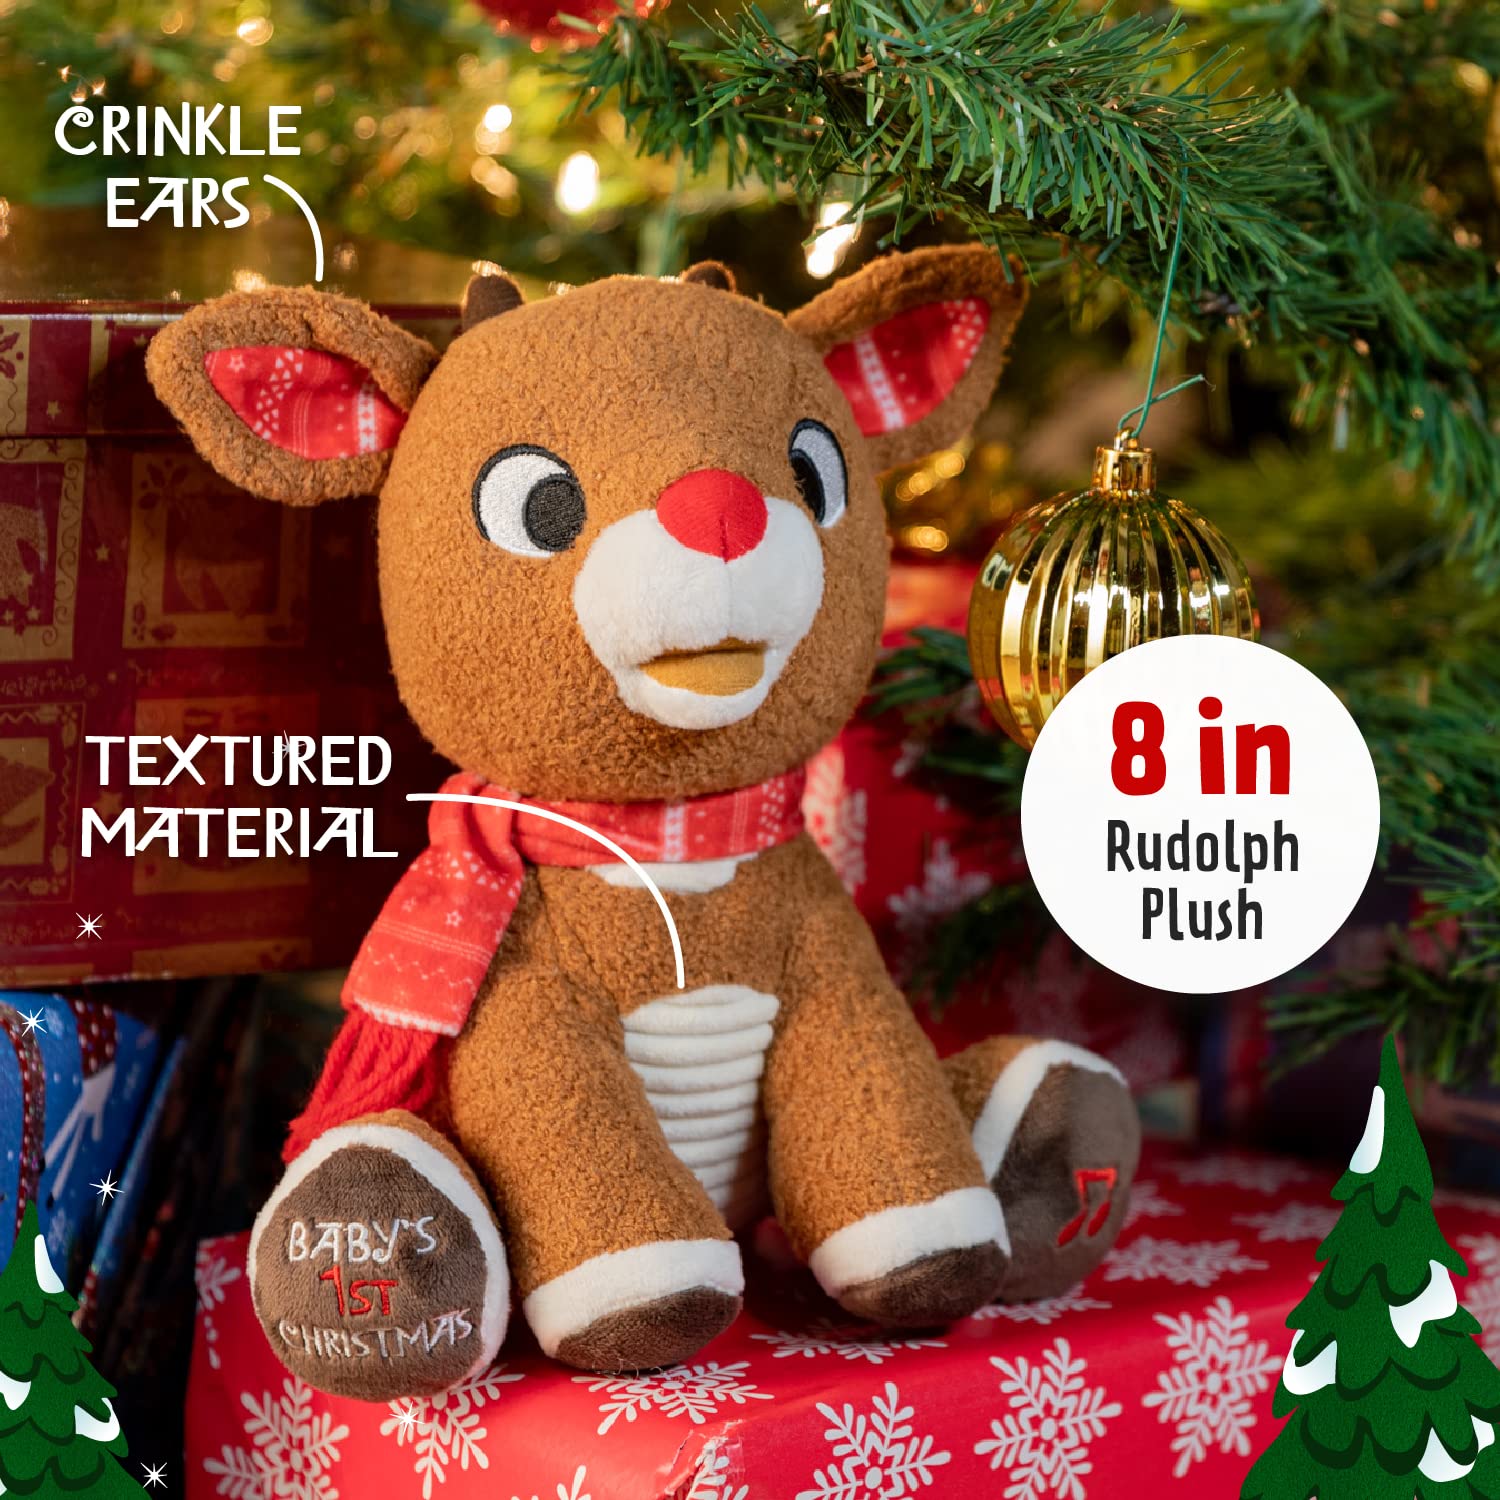 Rudolph The Red-Nosed Reindeer Musical Stuffed Animal, Baby's First Christmas Plush, 8 Inches